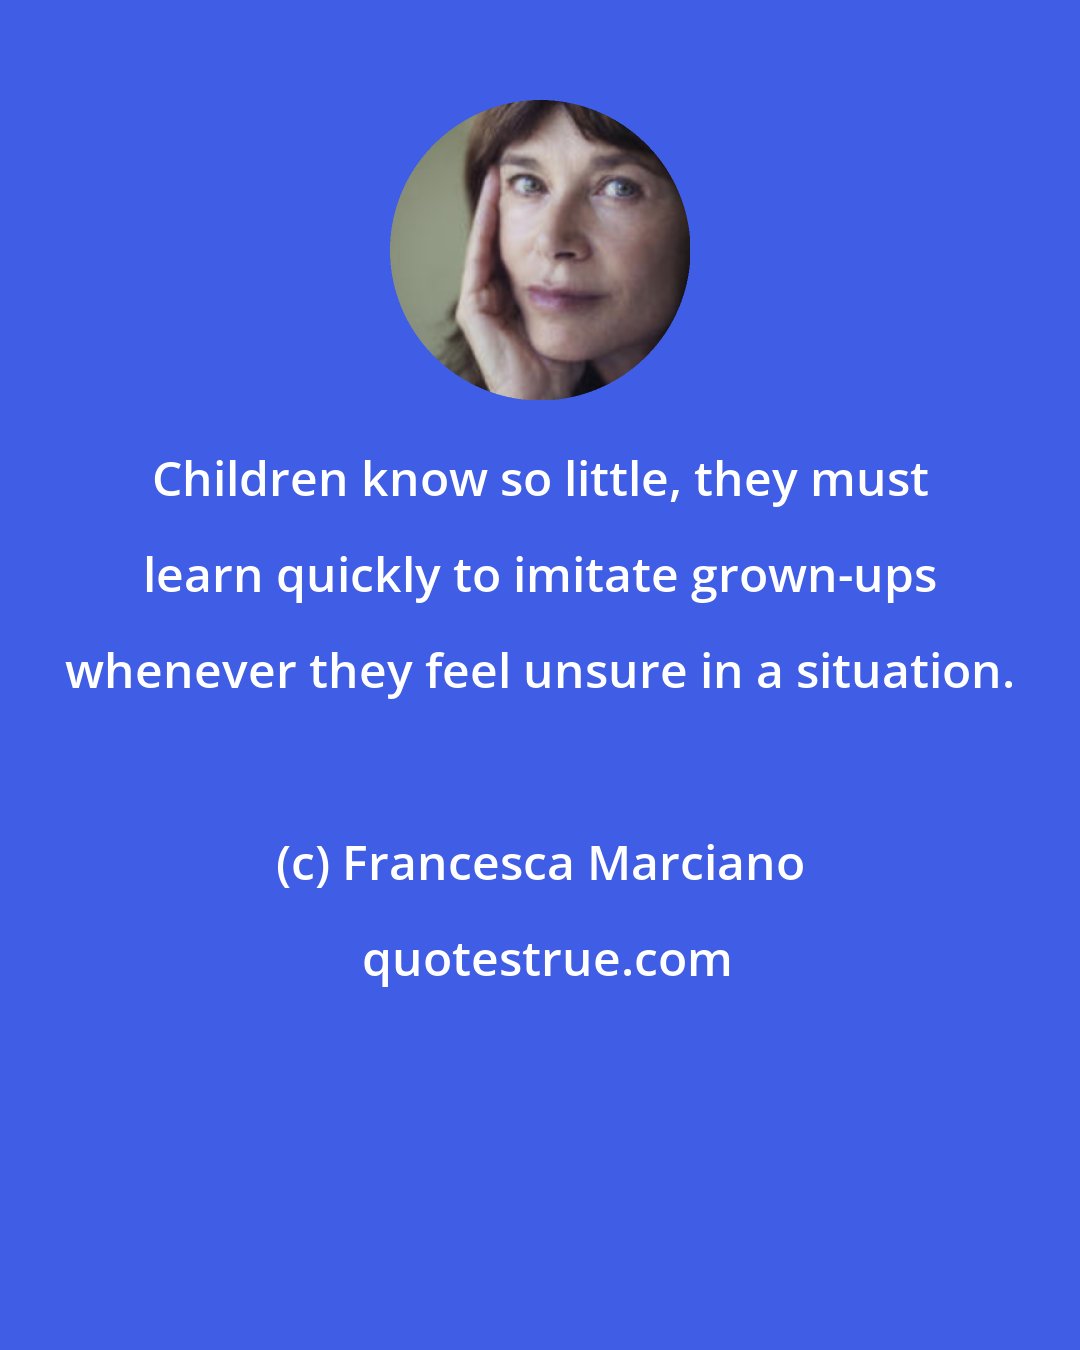 Francesca Marciano: Children know so little, they must learn quickly to imitate grown-ups whenever they feel unsure in a situation.